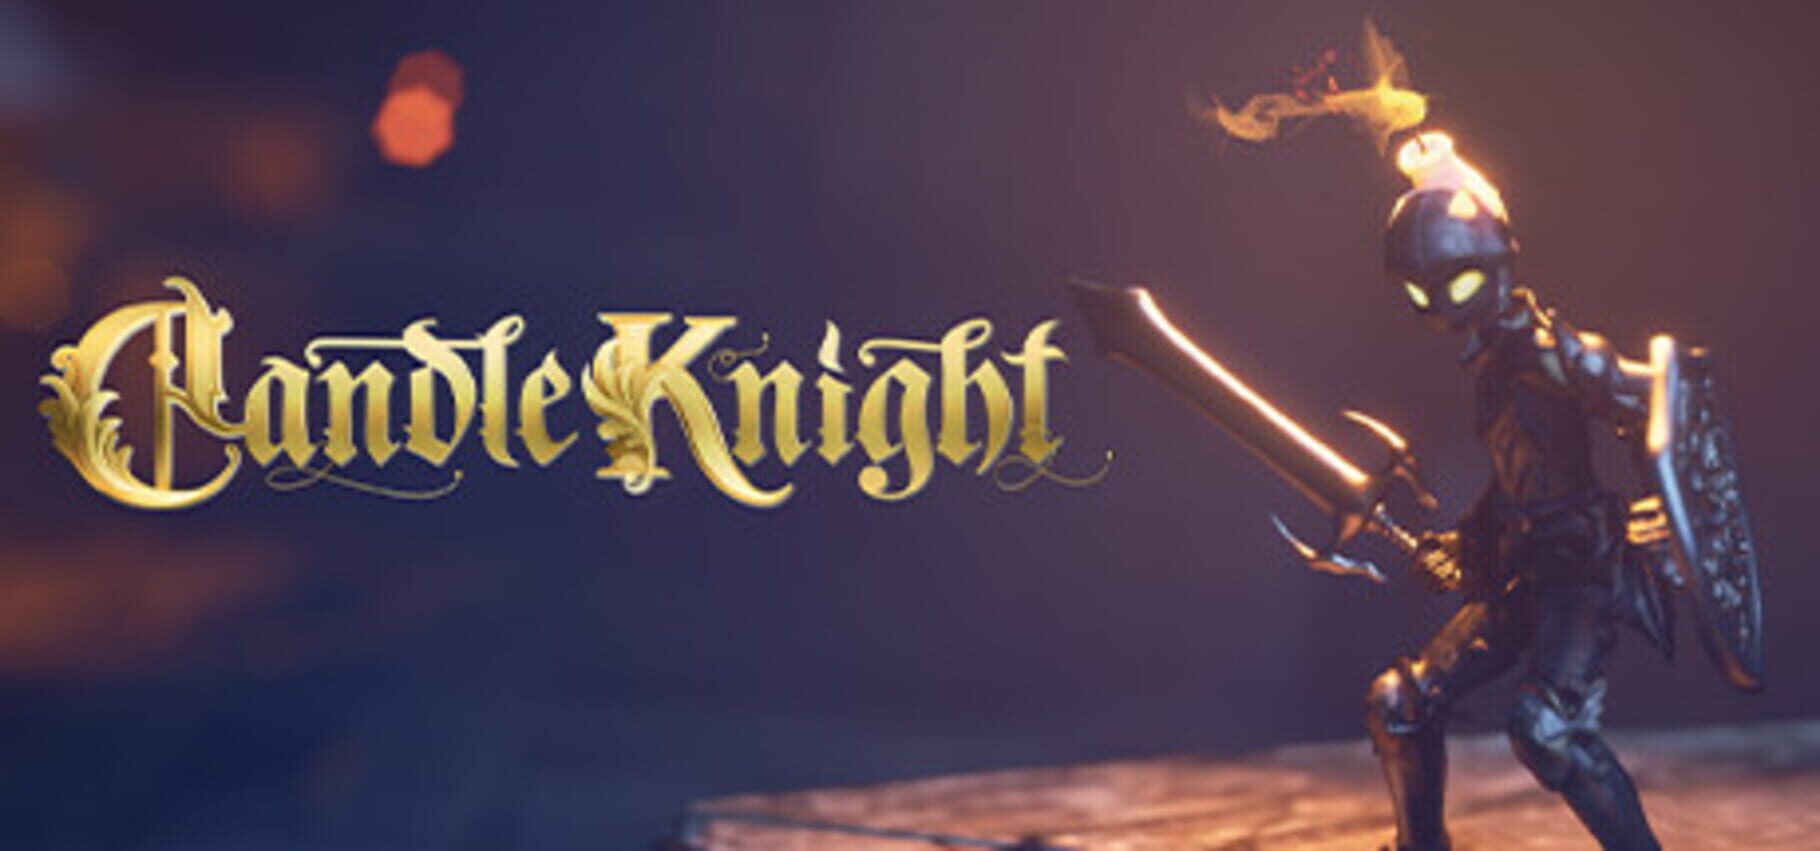 Arte - Candle Knight